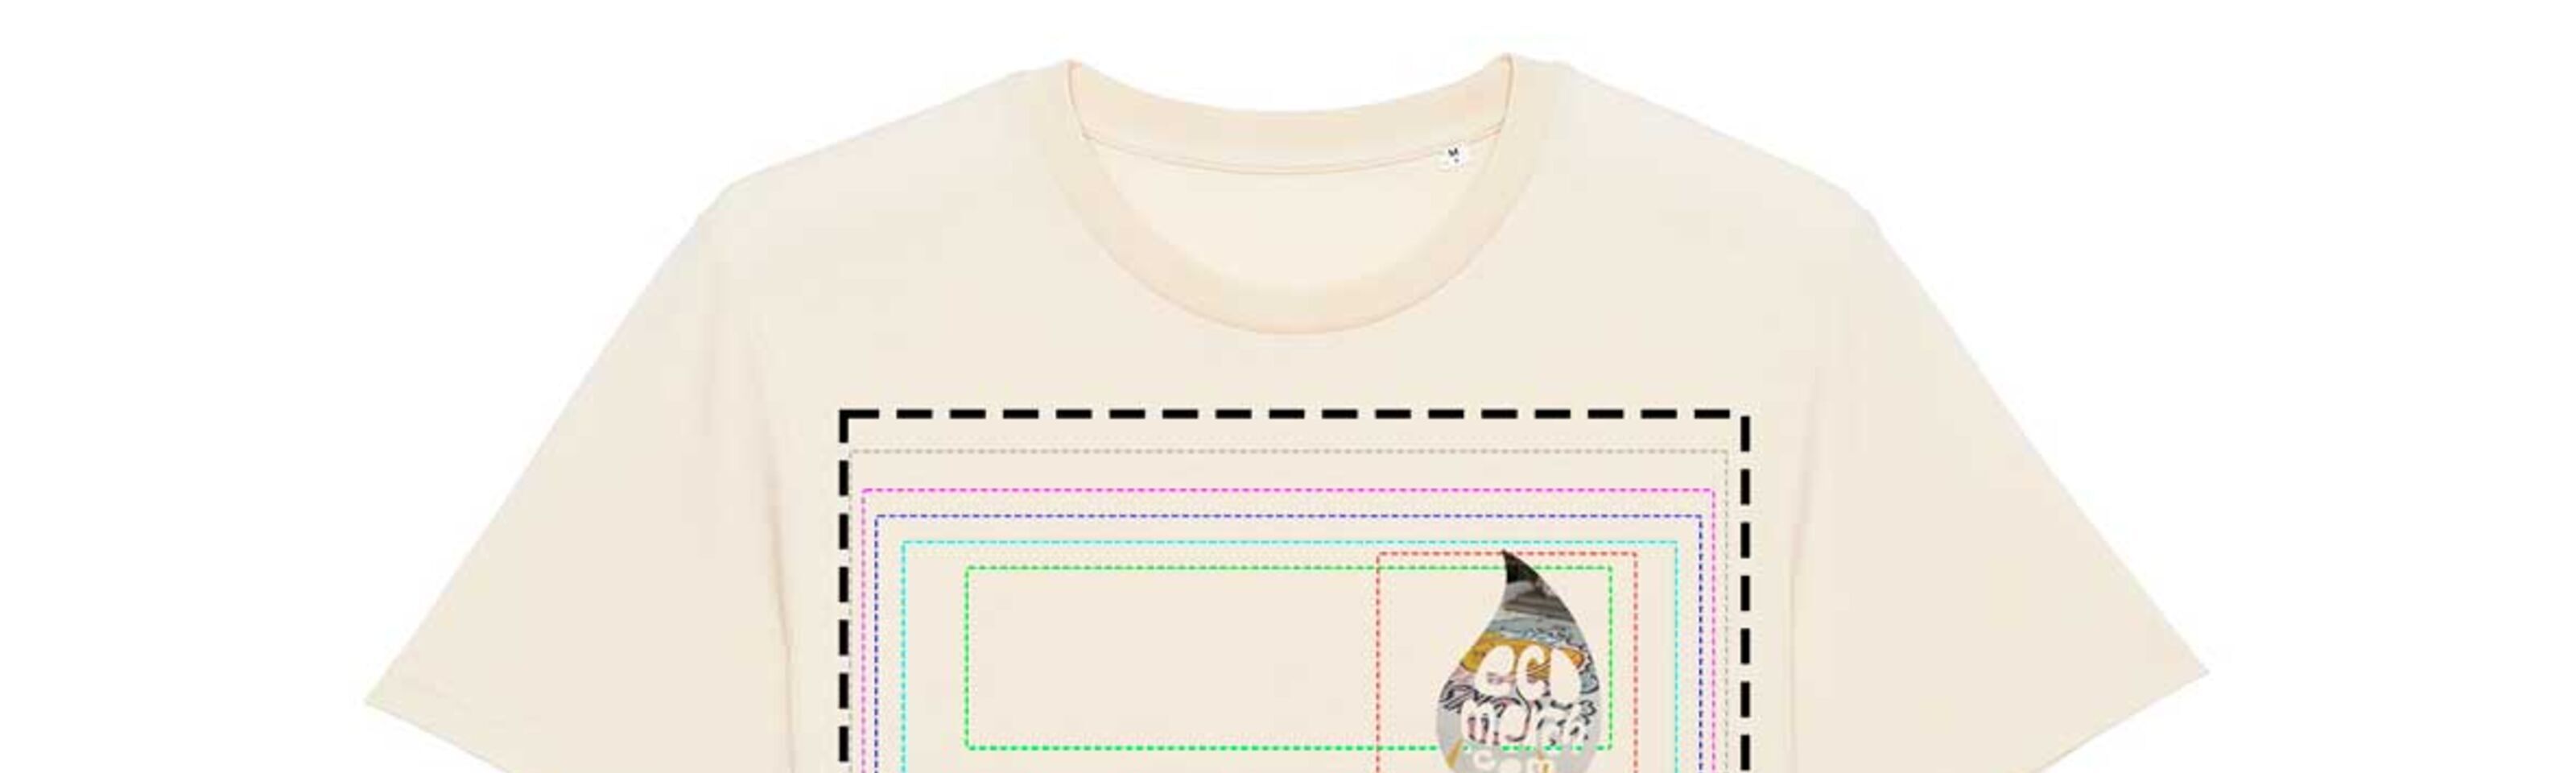 Preparing Your Artwork For Dtg Printing – Using Eco Merch Templates